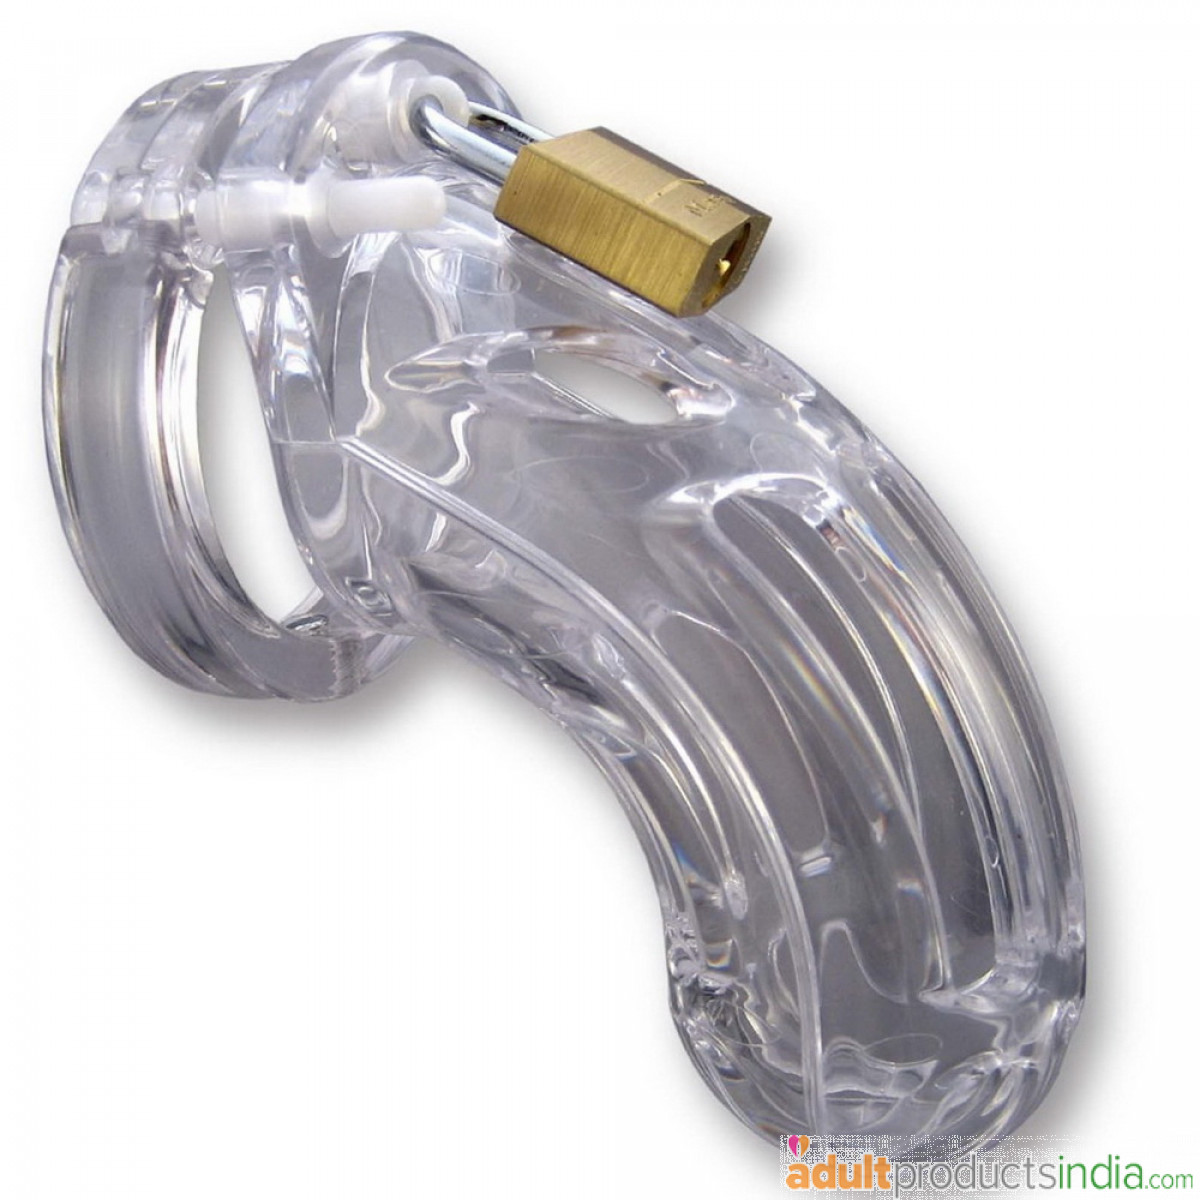 Male Chastity Transparent Chastity "The Curve" for men